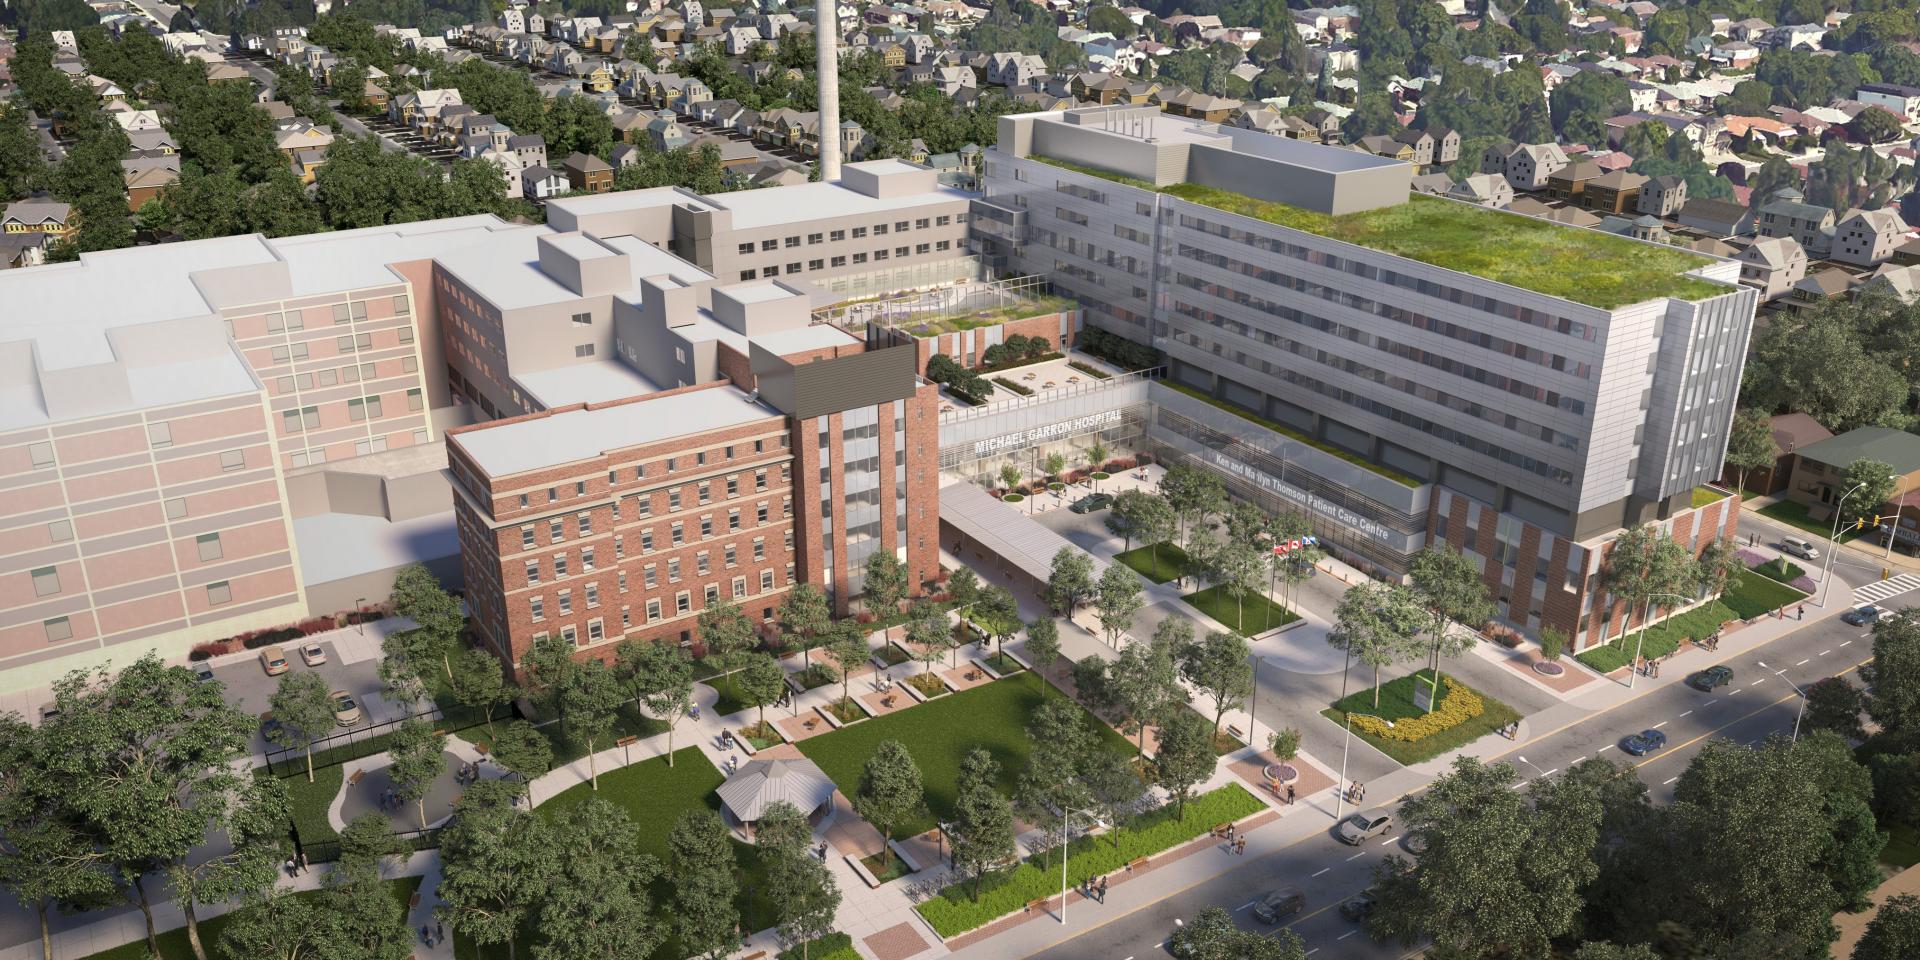 Architect's rendering of the new Michael Garron Hospital campus